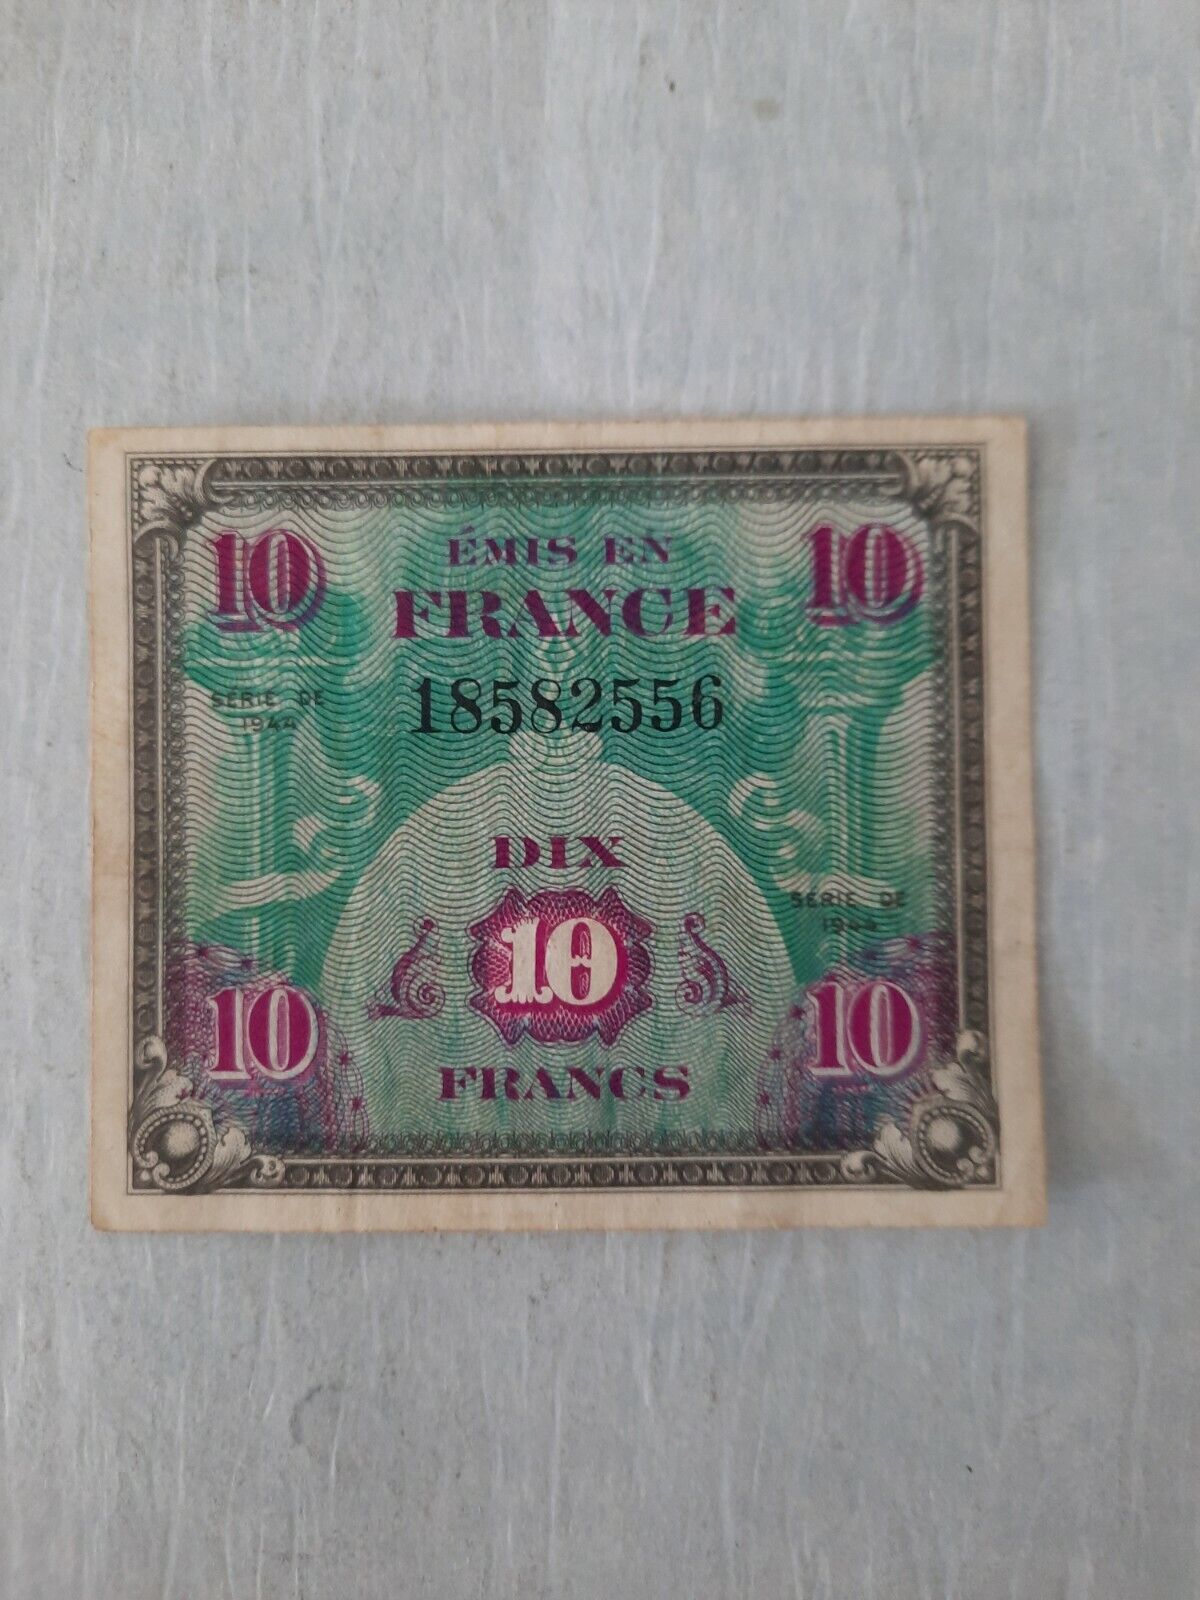 1944 France 10 Francs Super-cheap Allied Banknote P- Circulated 116 Lightly In a popularity